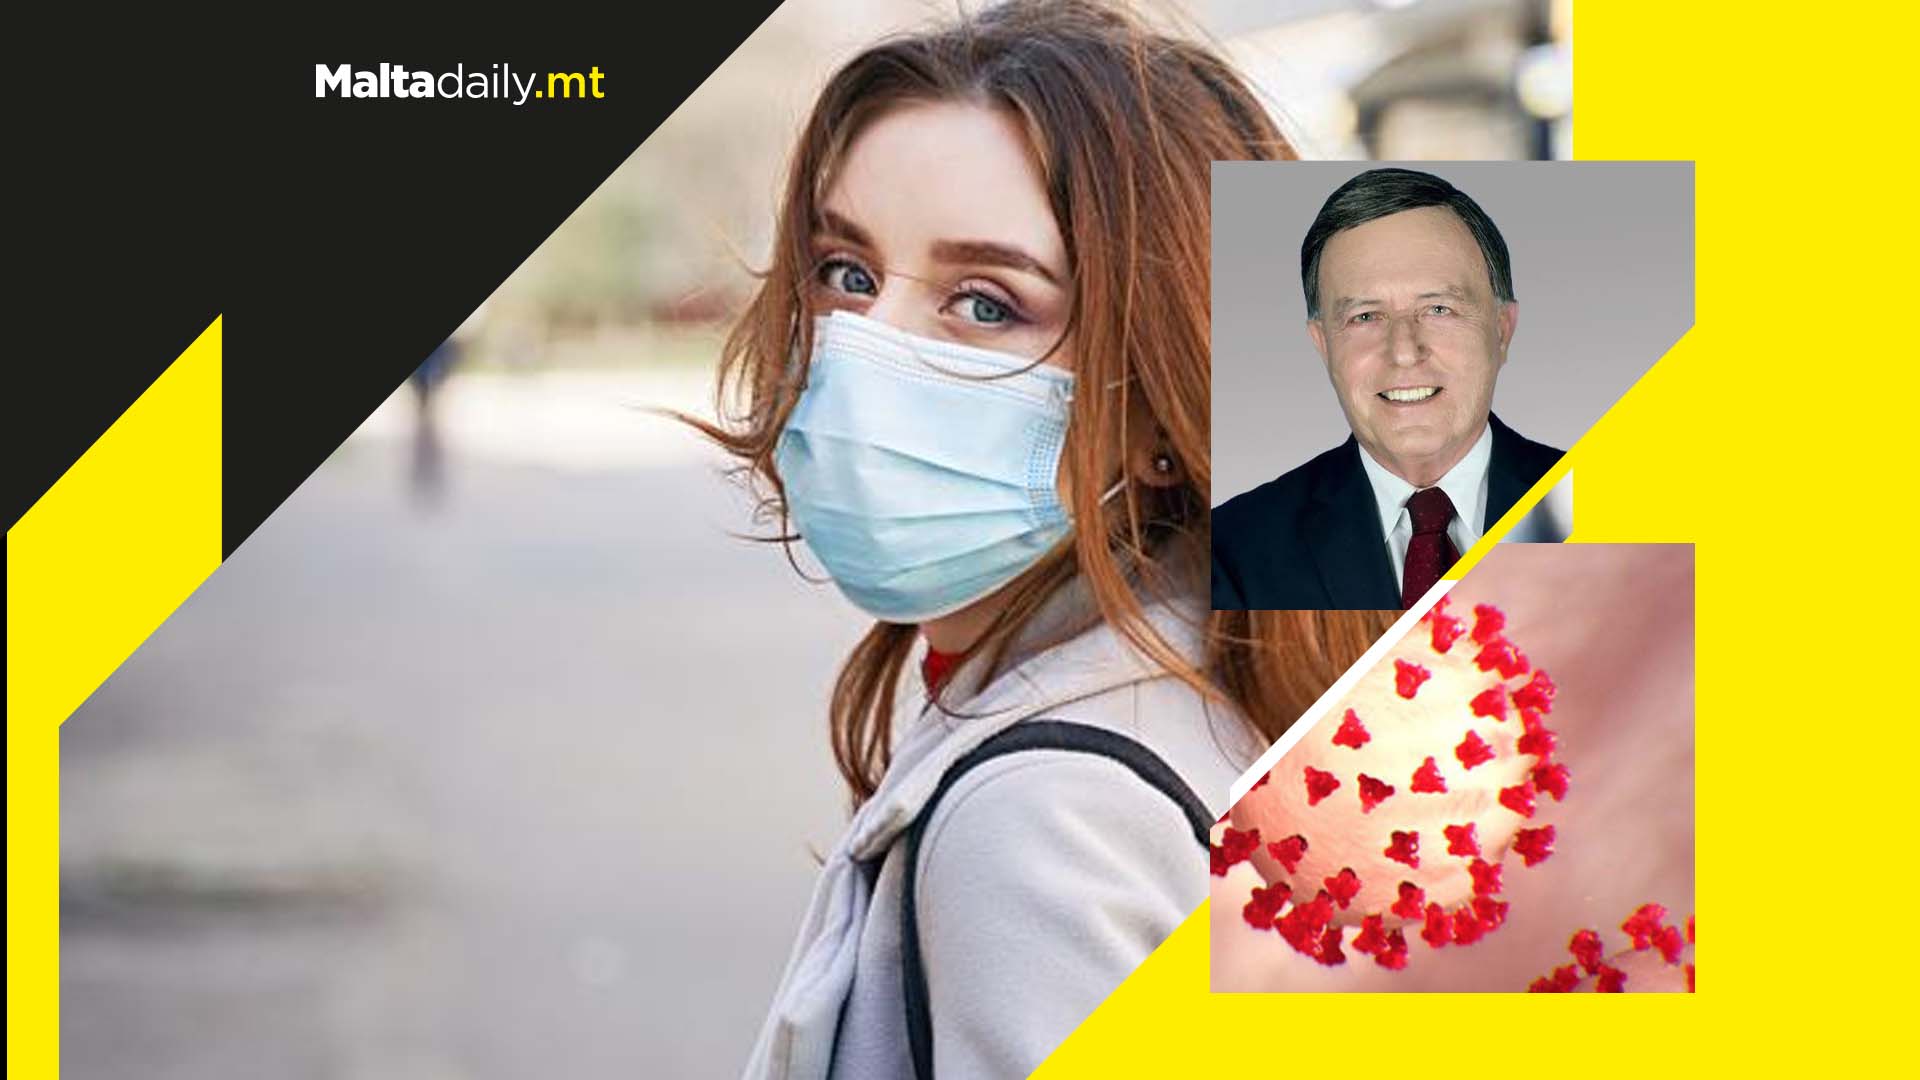 'The pandemic is still with us' warns former PM Alfred Sant